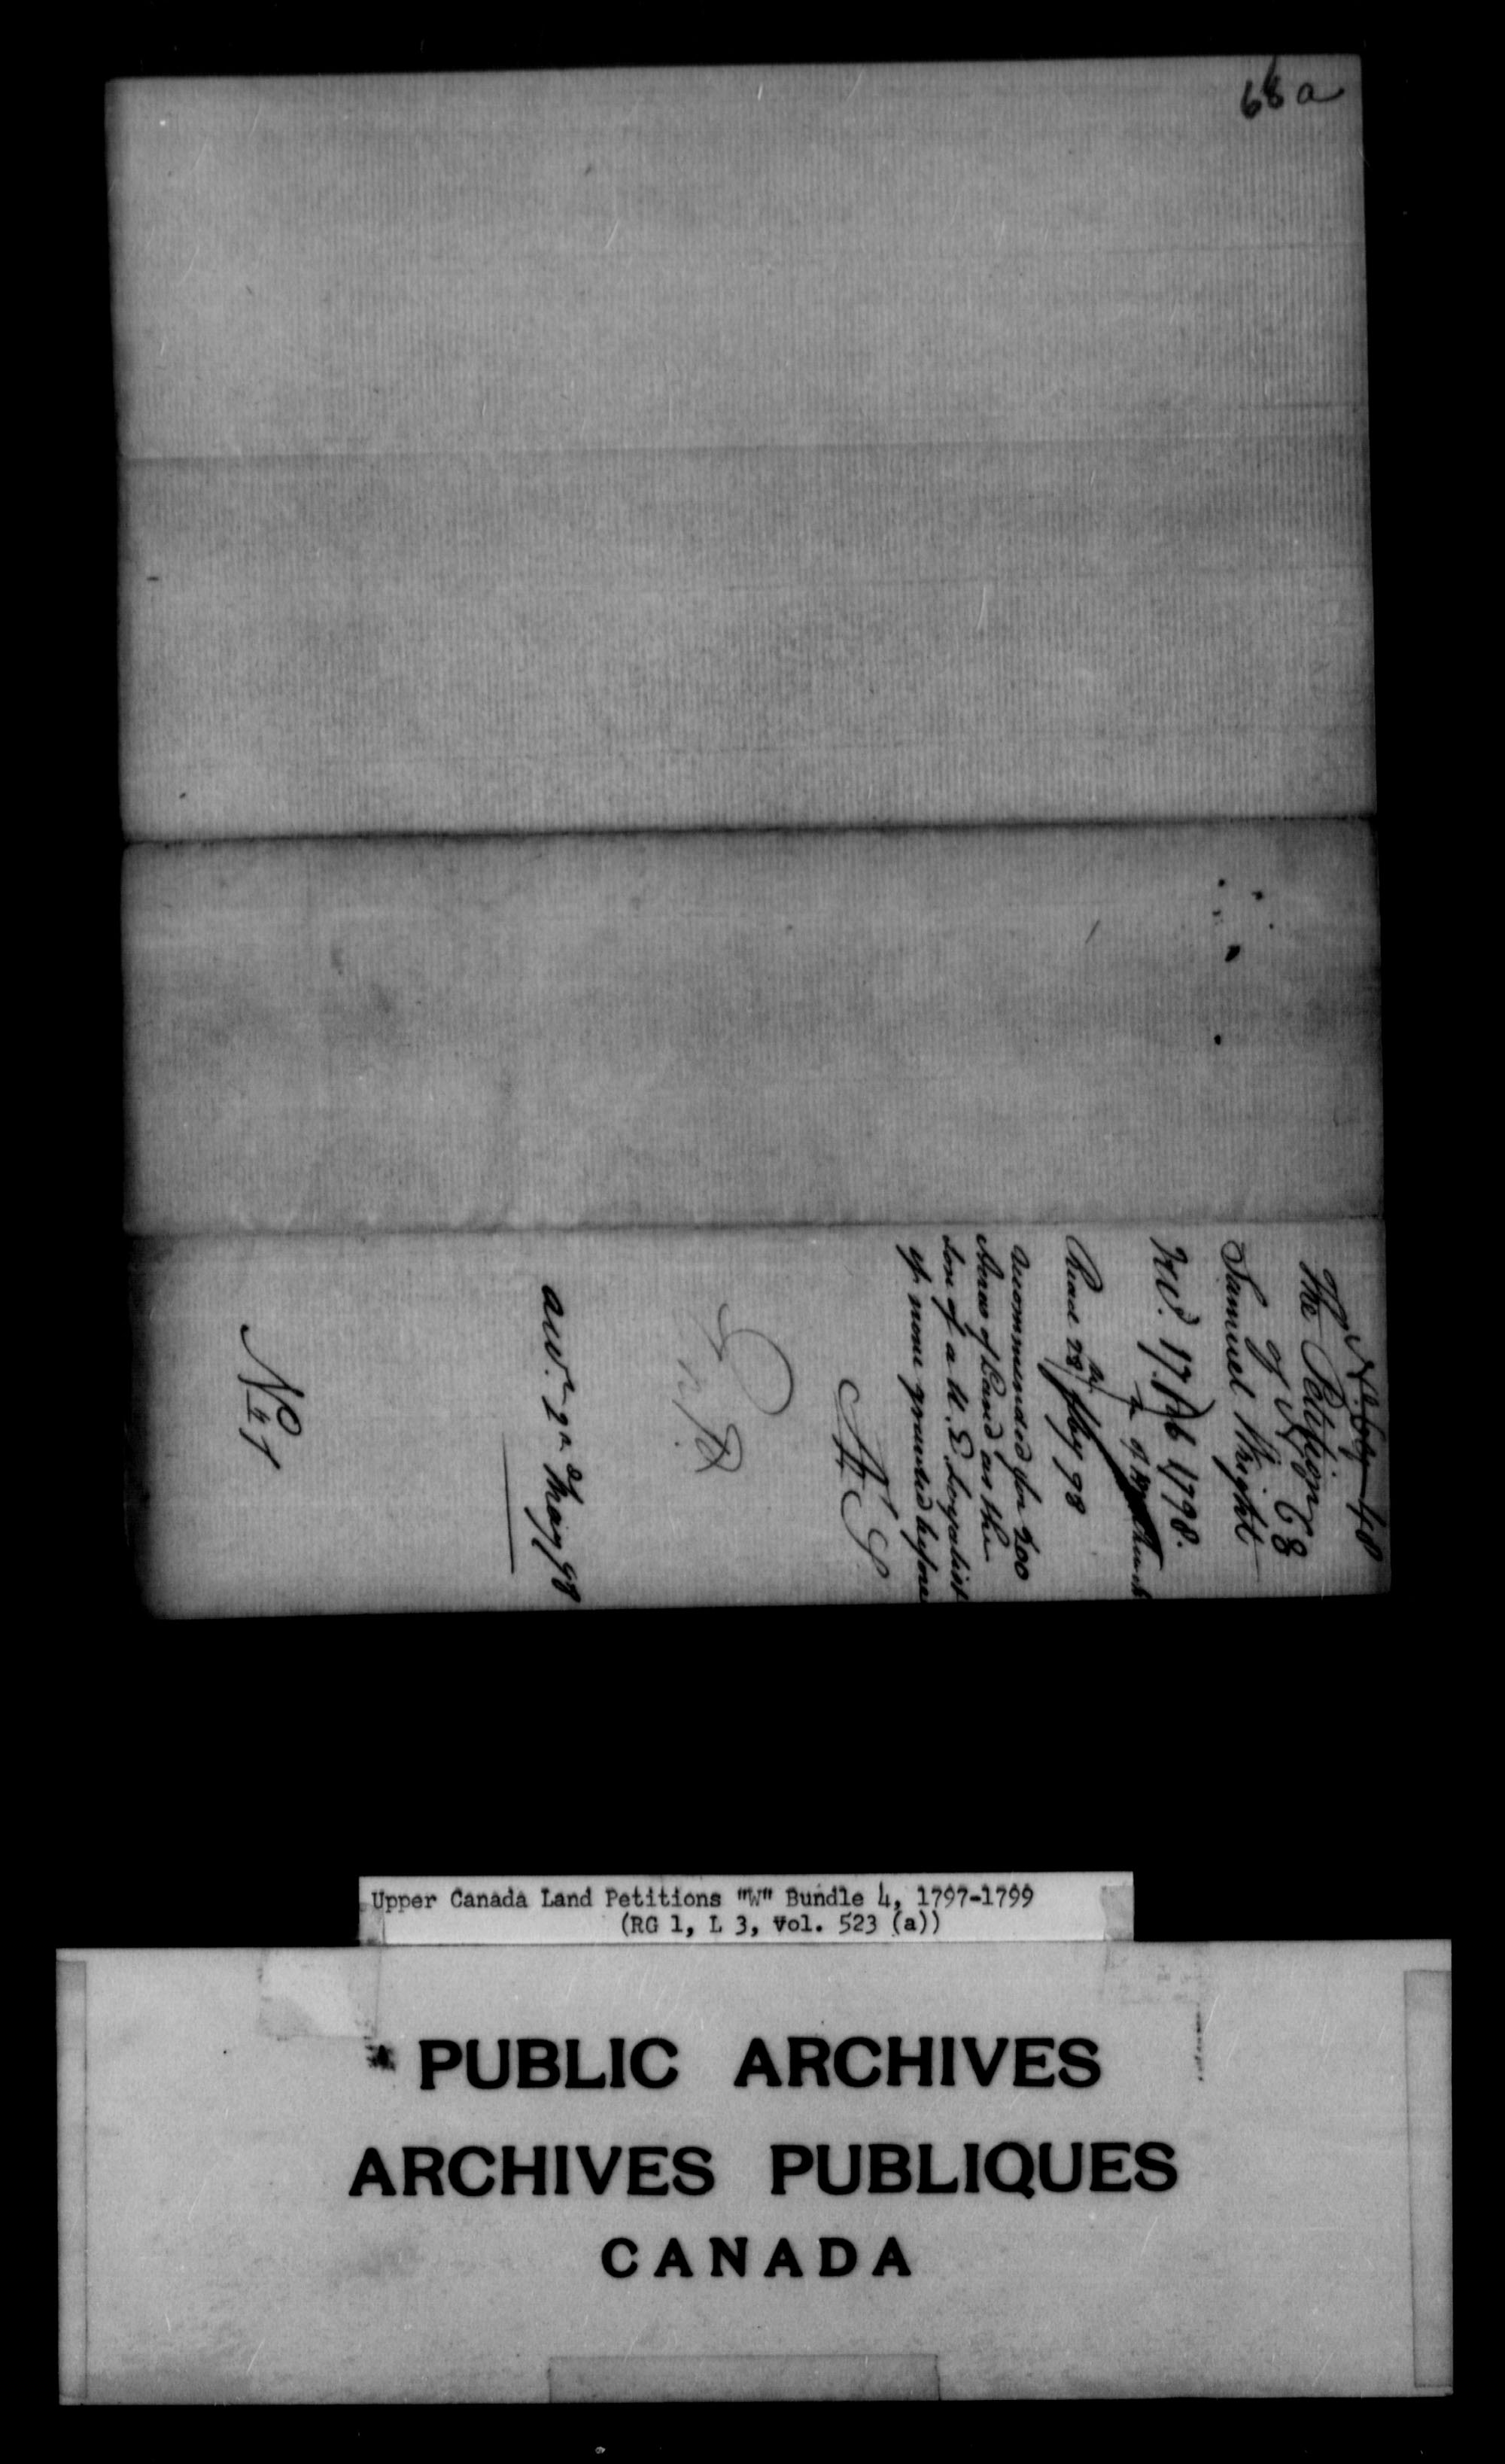 Title: Upper Canada Land Petitions (1763-1865) - Mikan Number: 205131 - Microform: c-2951